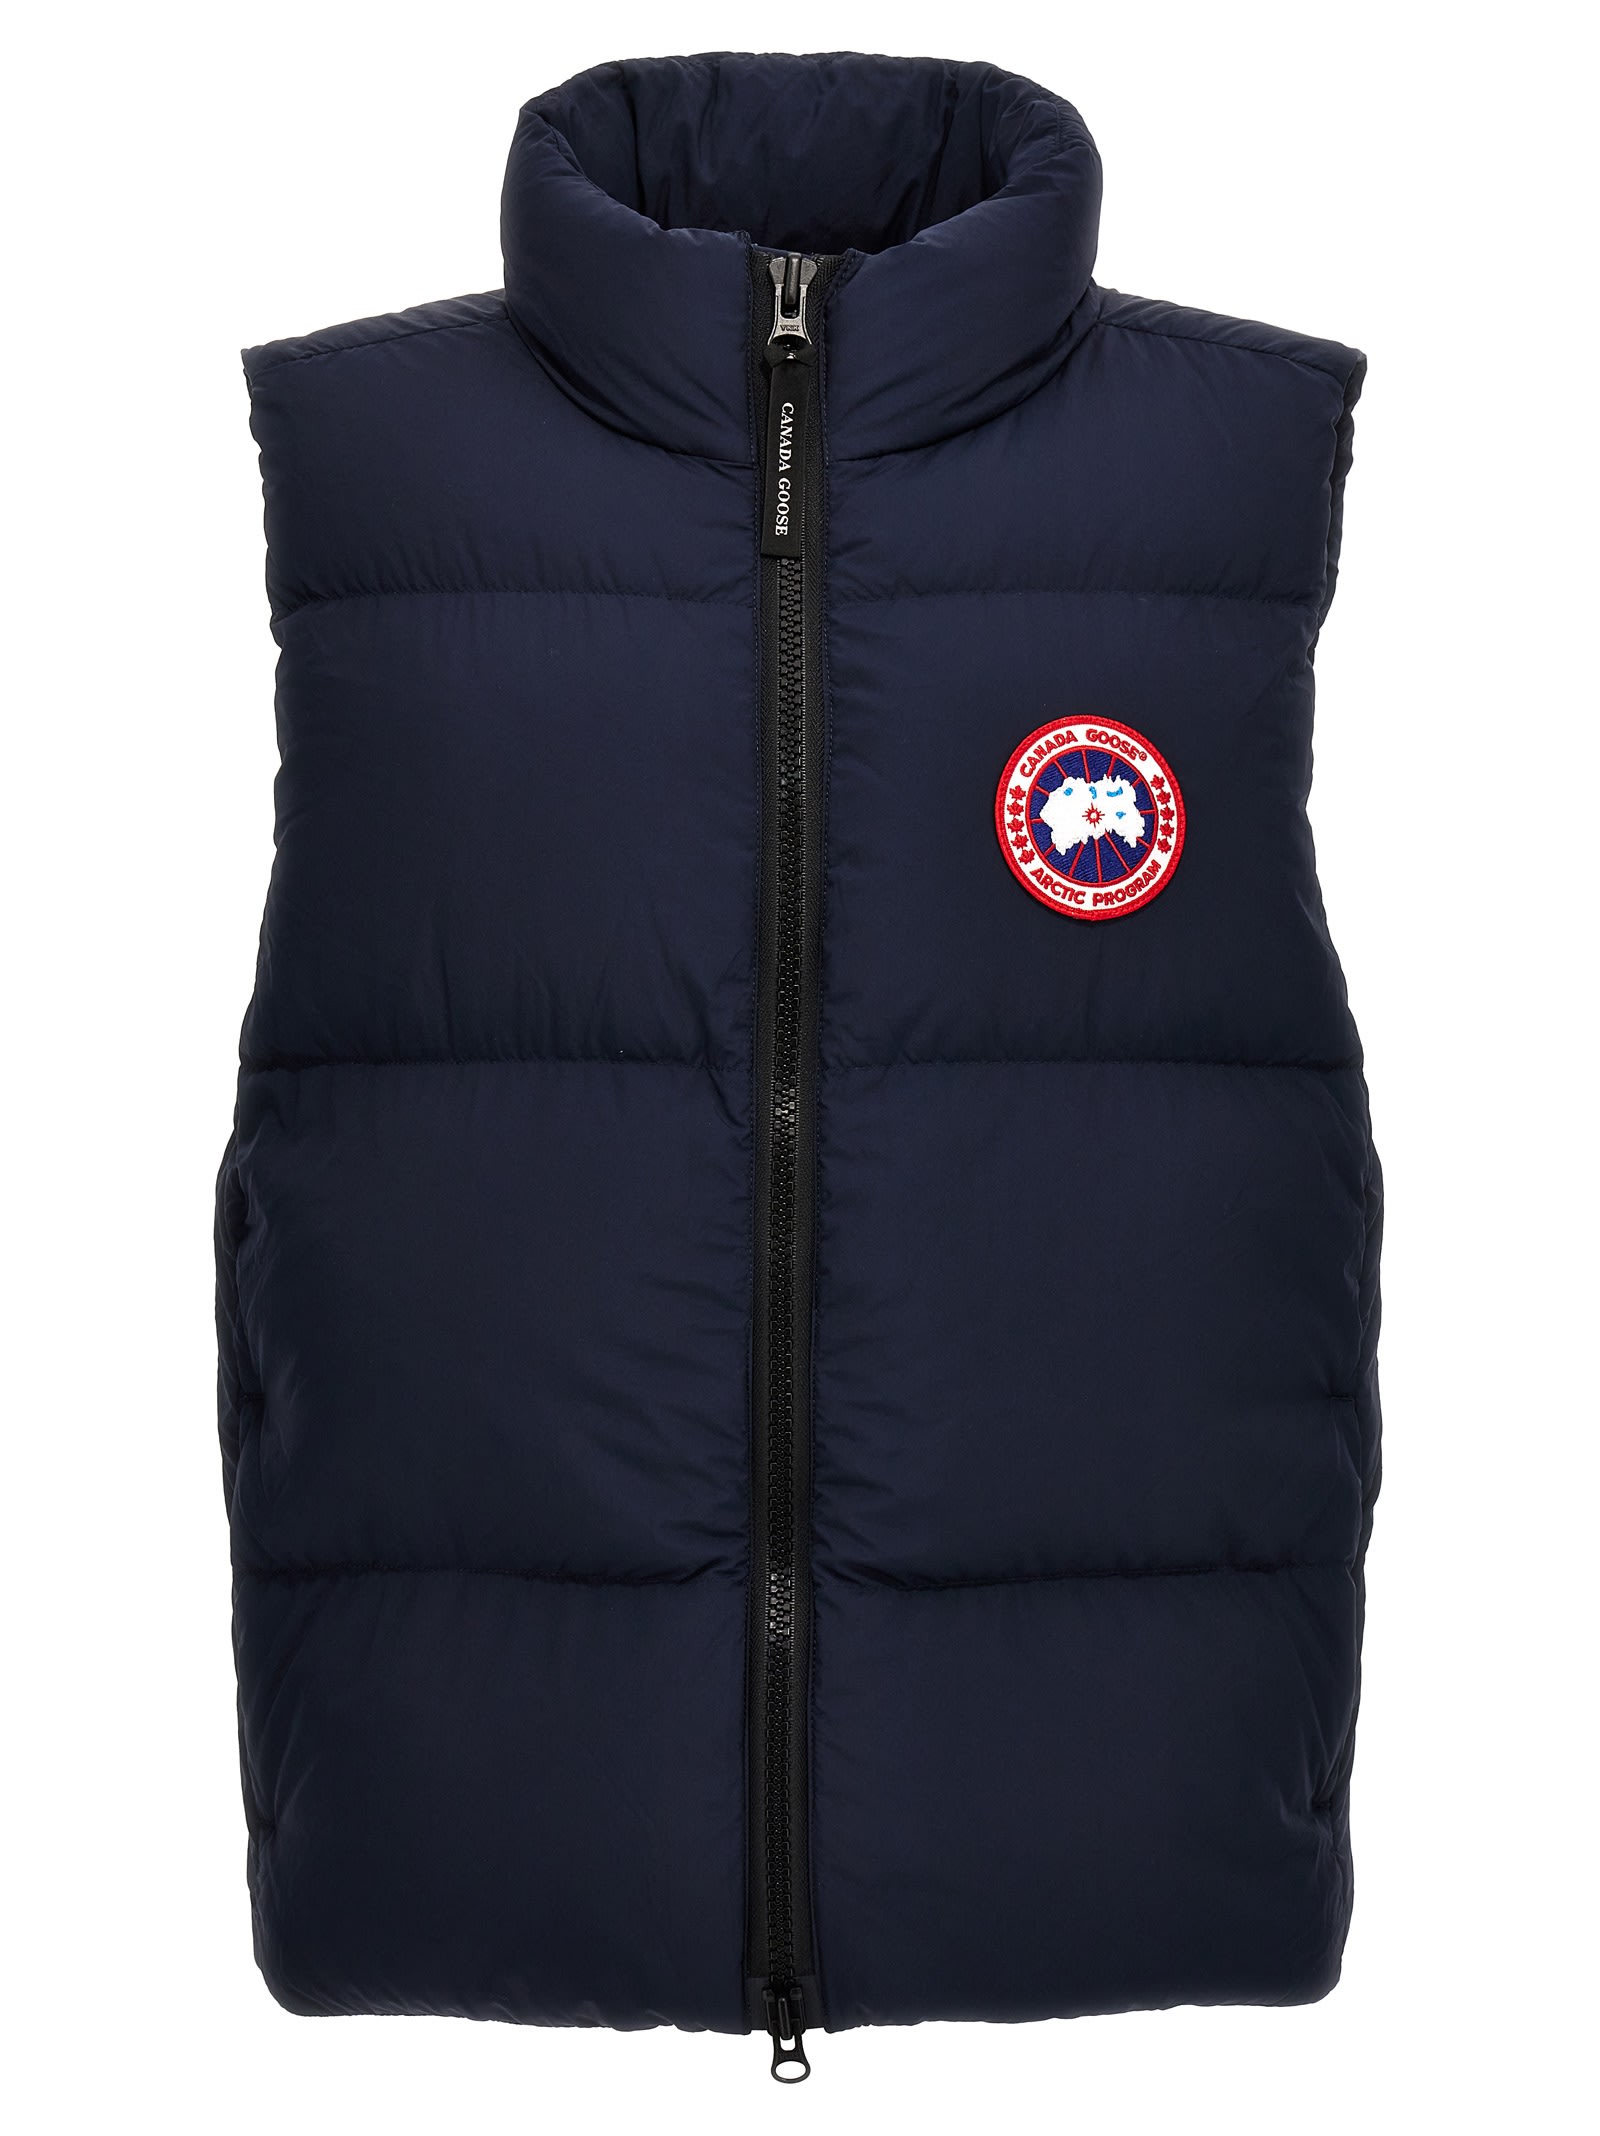 CANADA GOOSE LAWRENCE VEST